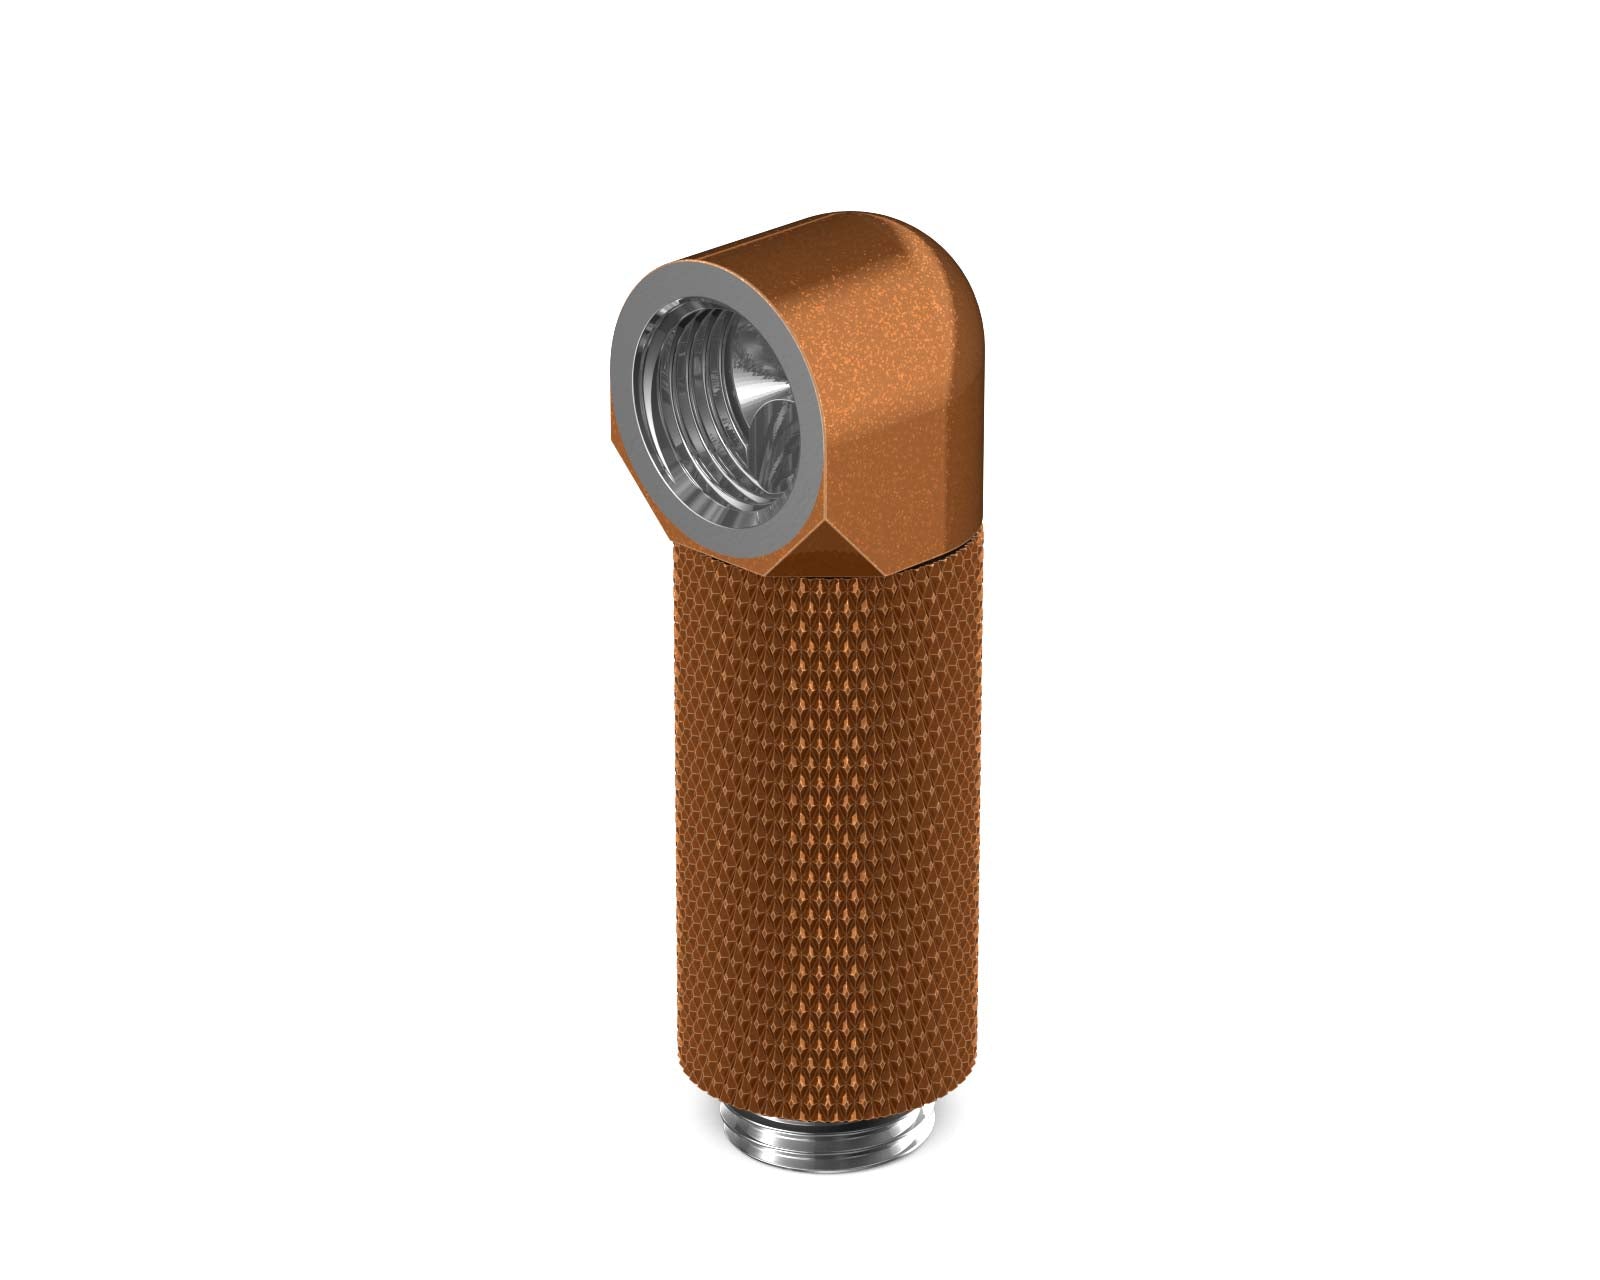 PrimoChill Male to Female G 1/4in. 90 Degree SX Rotary 35mm Extension Elbow Fitting - PrimoChill - KEEPING IT COOL Copper